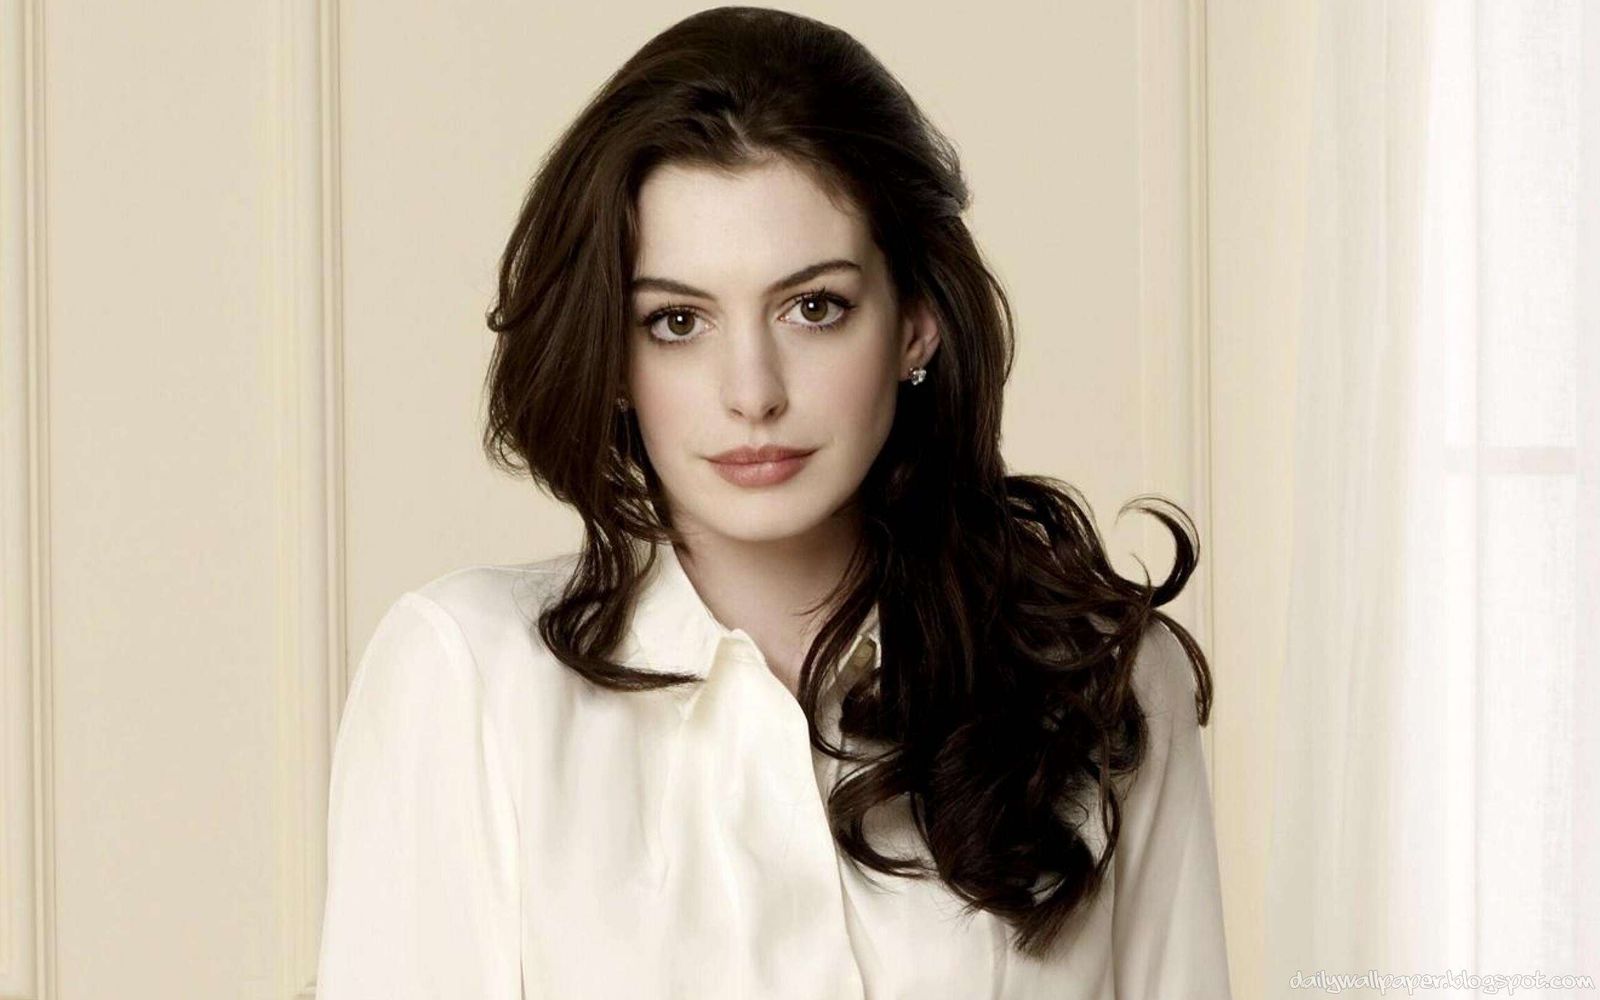 This Might Be Anne Hathaway’s Next Project!